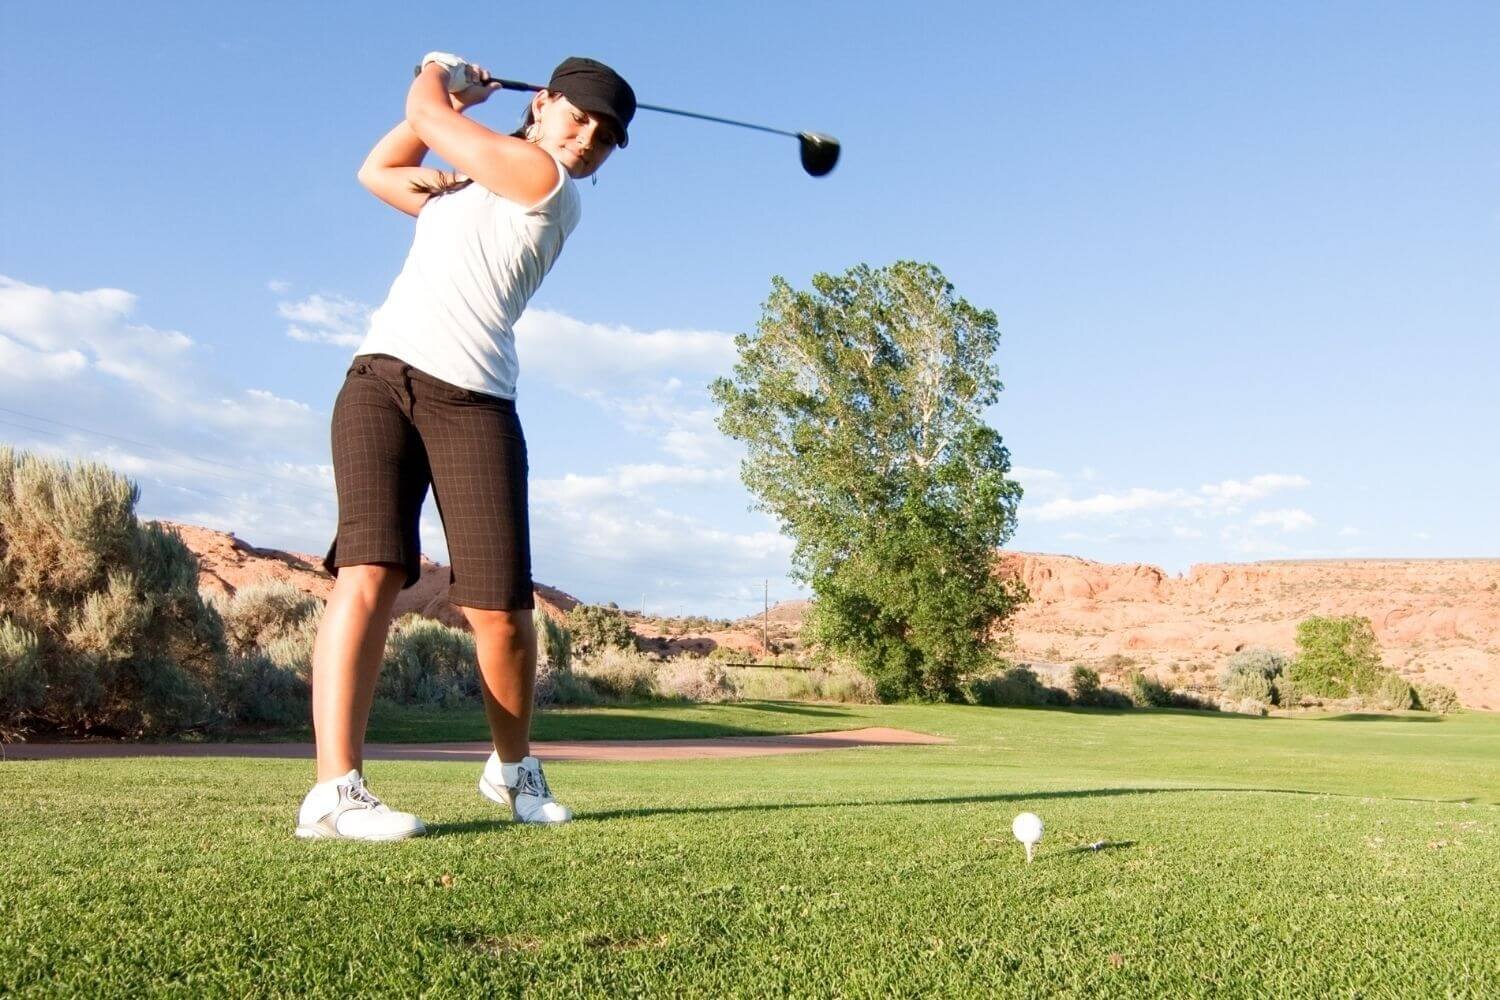 Woman swinging a driver to hit the golf ball off of the tee